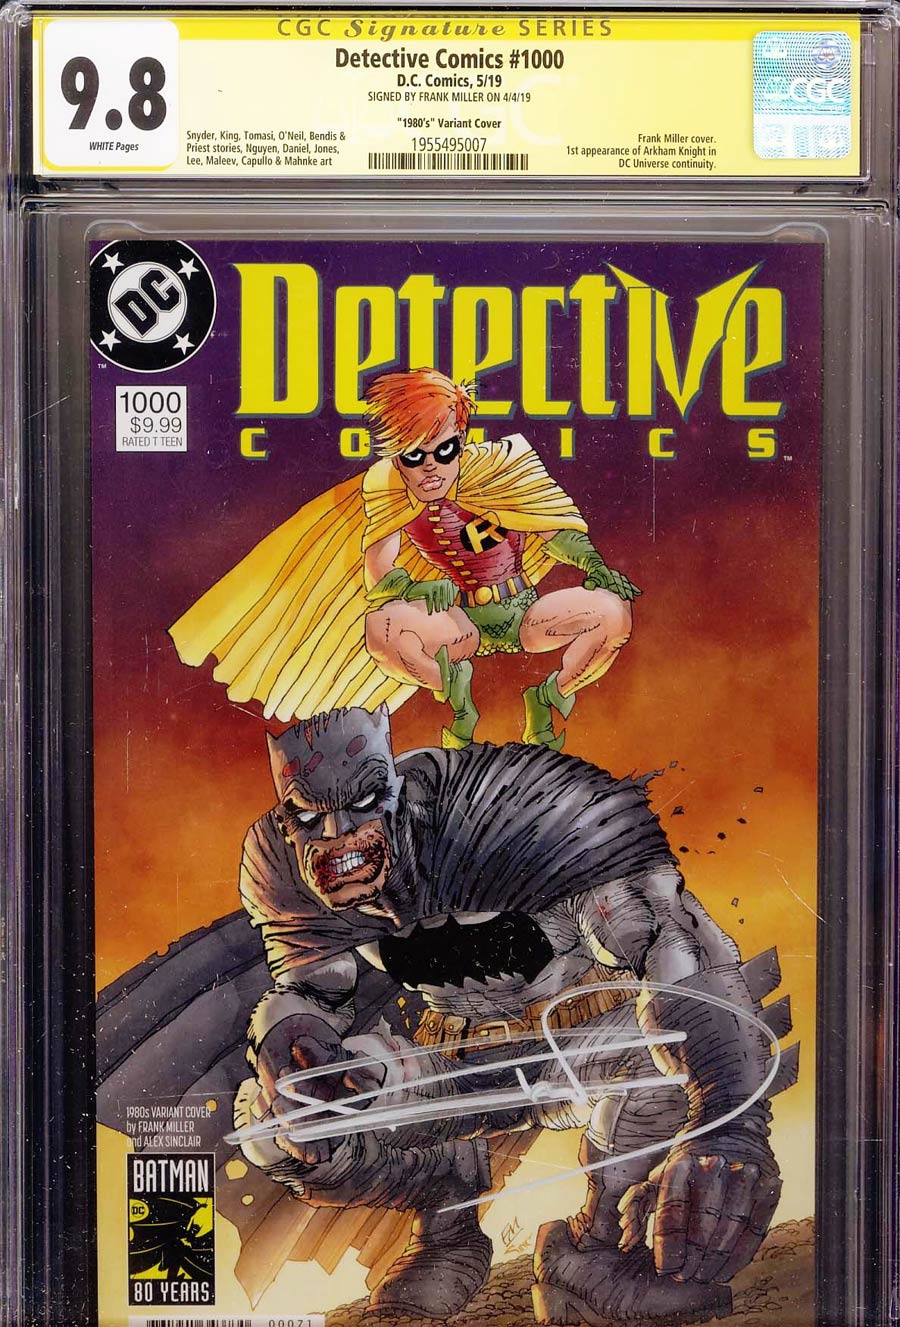 Detective Comics Vol 2 #1000 CGC SS 9.8 Signed By Frank Miller Variant Frank Miller 1980s Cover